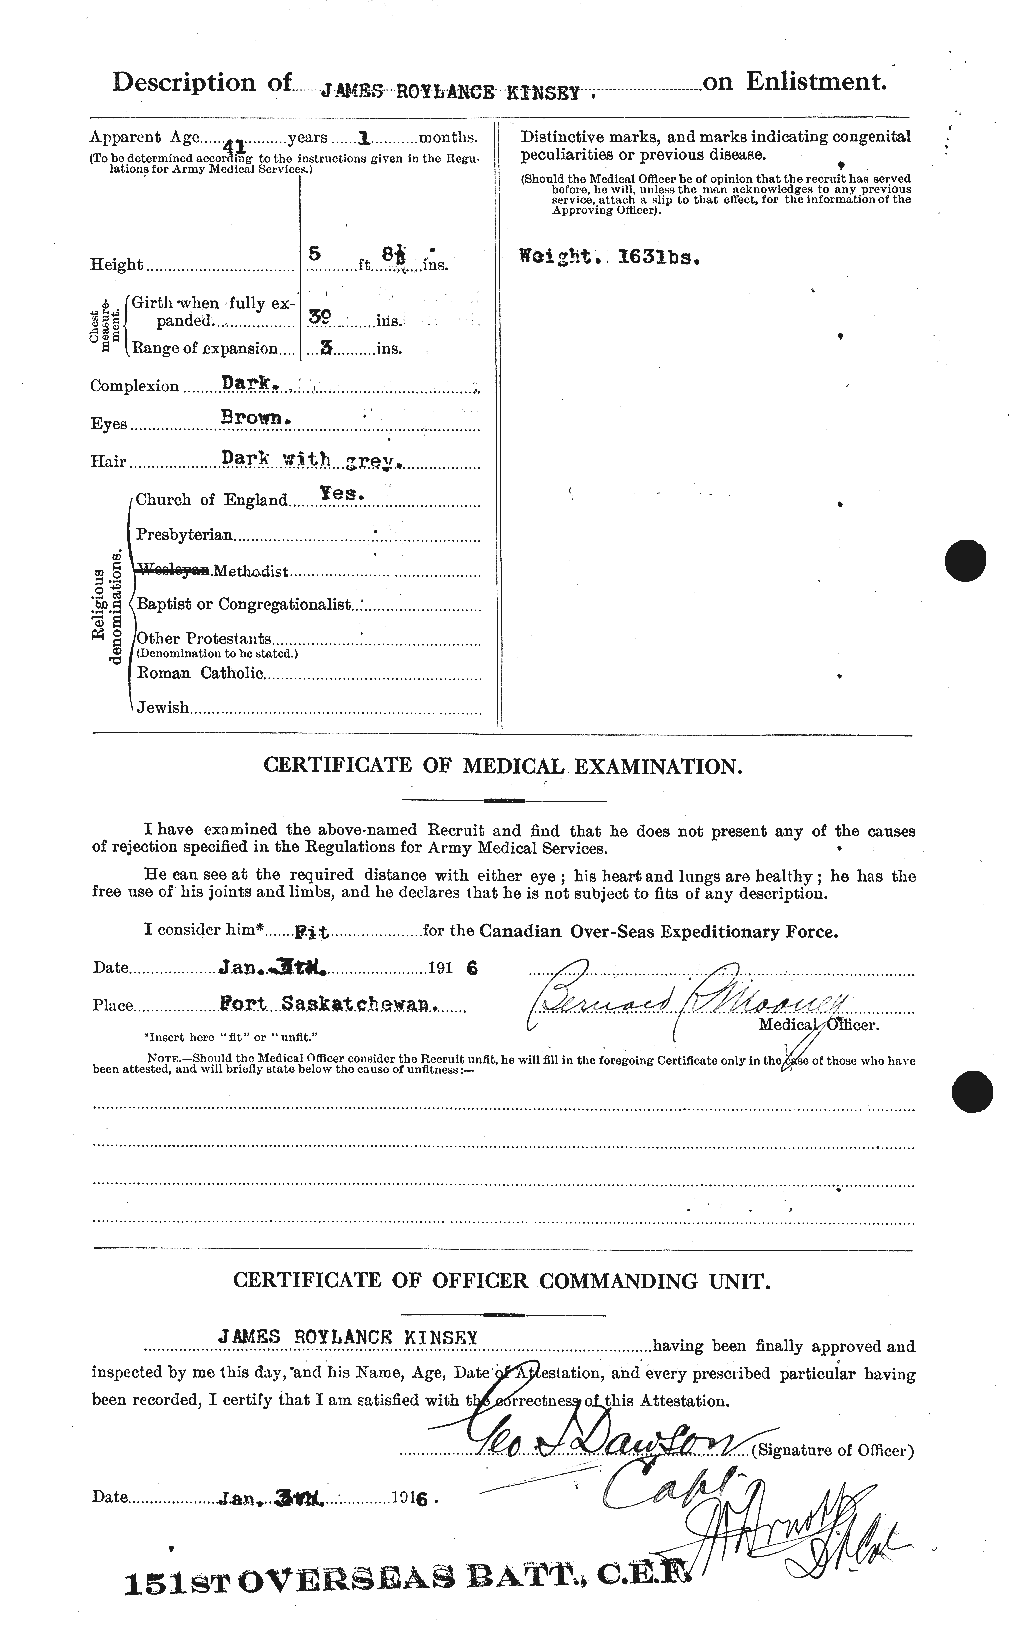 Personnel Records of the First World War - CEF 437016b